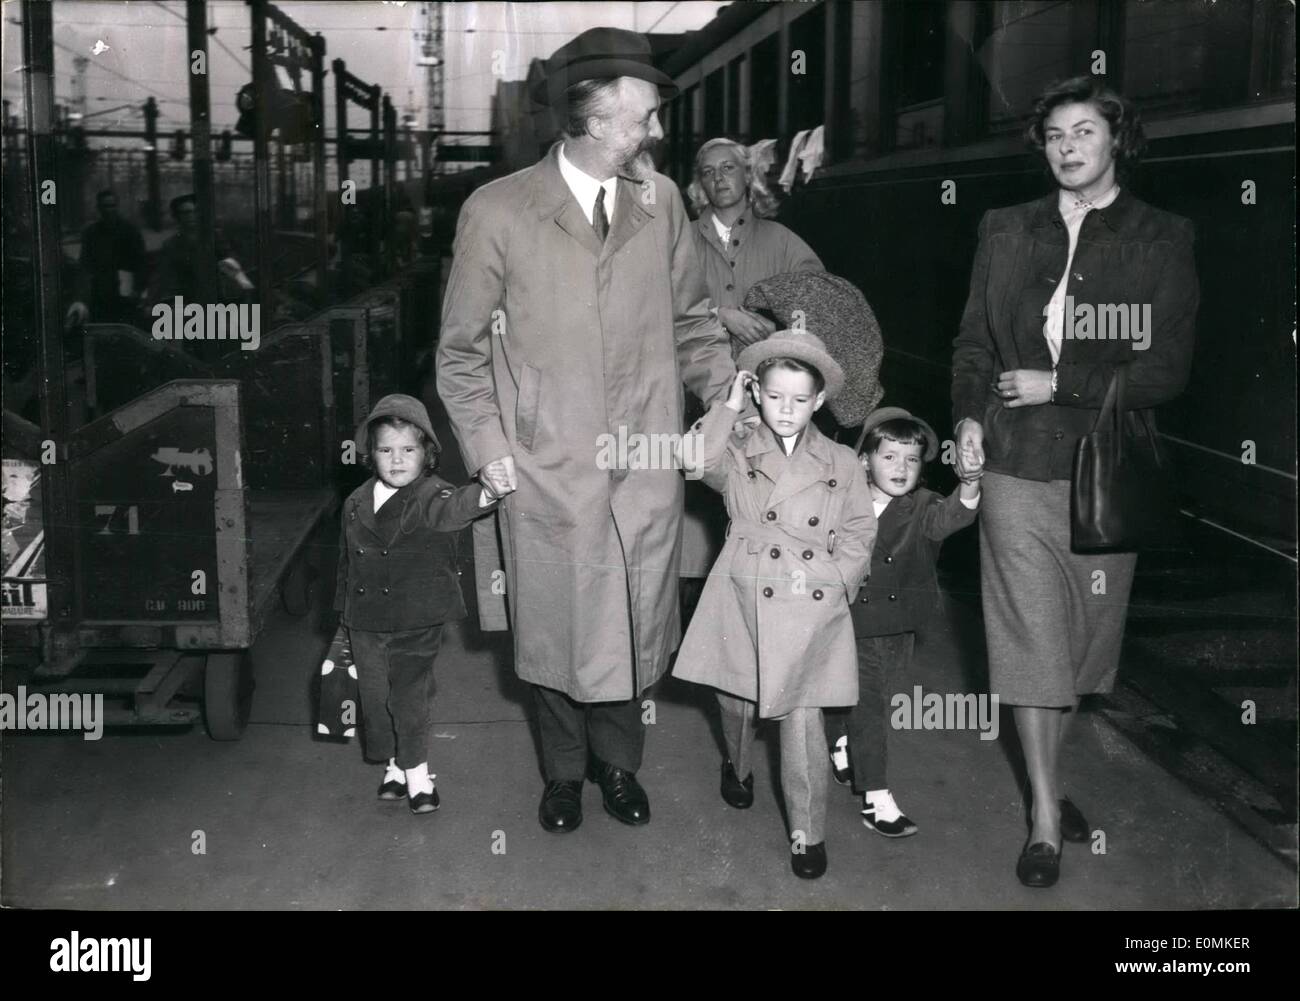 Oct. 10, 1955 - Ingrid Bergman Arrives In Paris - Nurse, Friend Ad Children: Ingrid Bergman with her children Ingrid, Roberto and Isabelle, accompanied by a friend (unidentified) and followed by the nurse as she alighted from the orient express coming from Rome this morning. She is to star a new film produced by Jean Renoir ''Oeillet Rouge'' (Red Carnation) based on the story of general Boulanger's life. Stock Photo